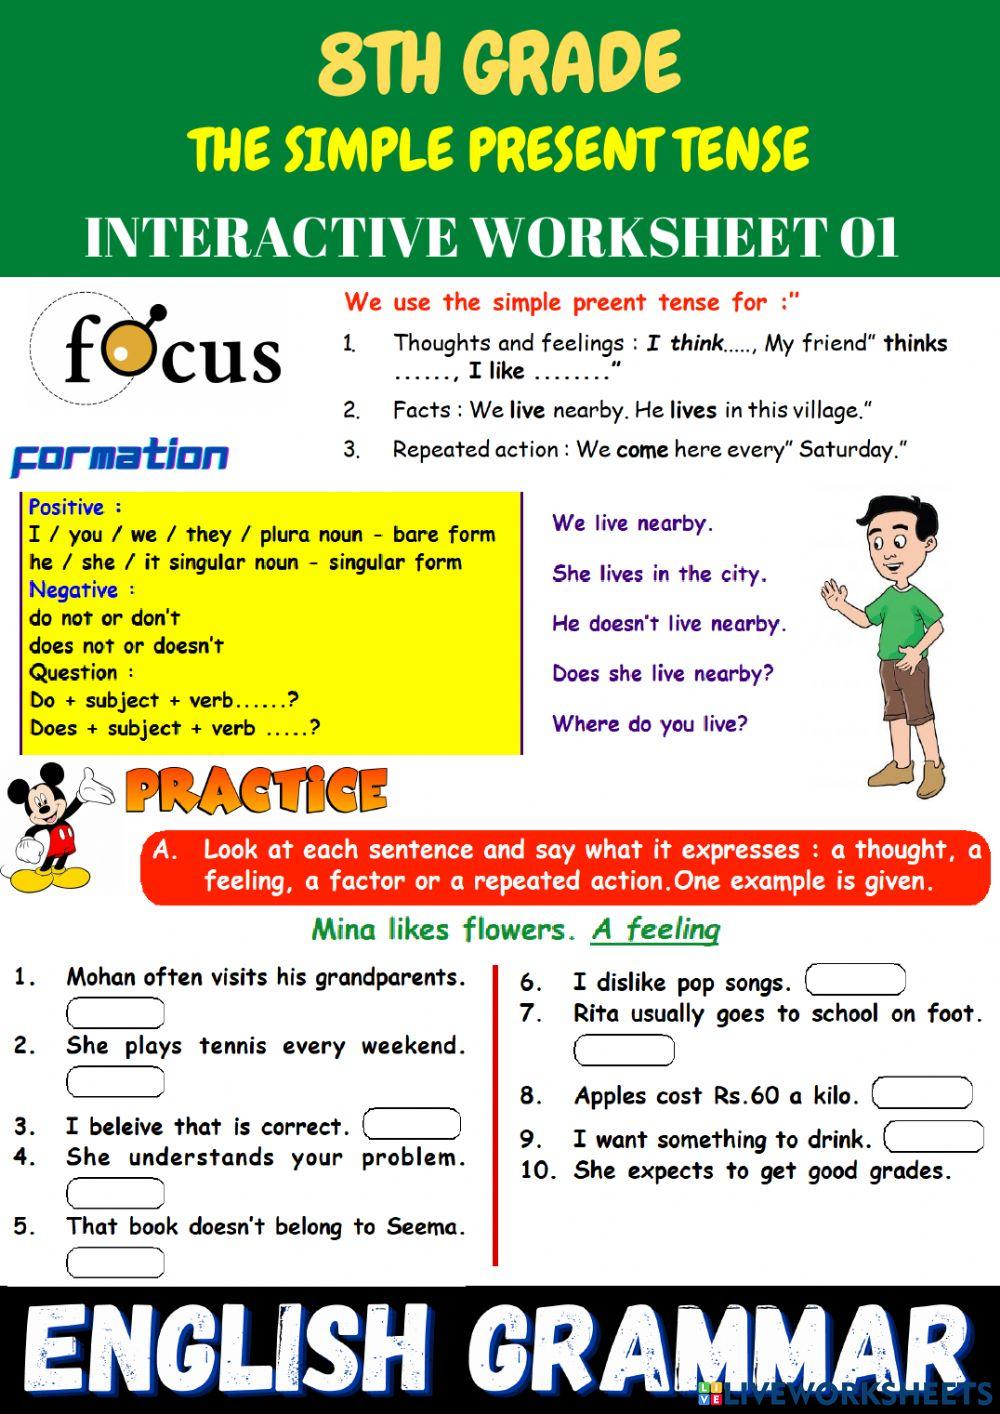 8th- eng - ps 01 - the simple present tense